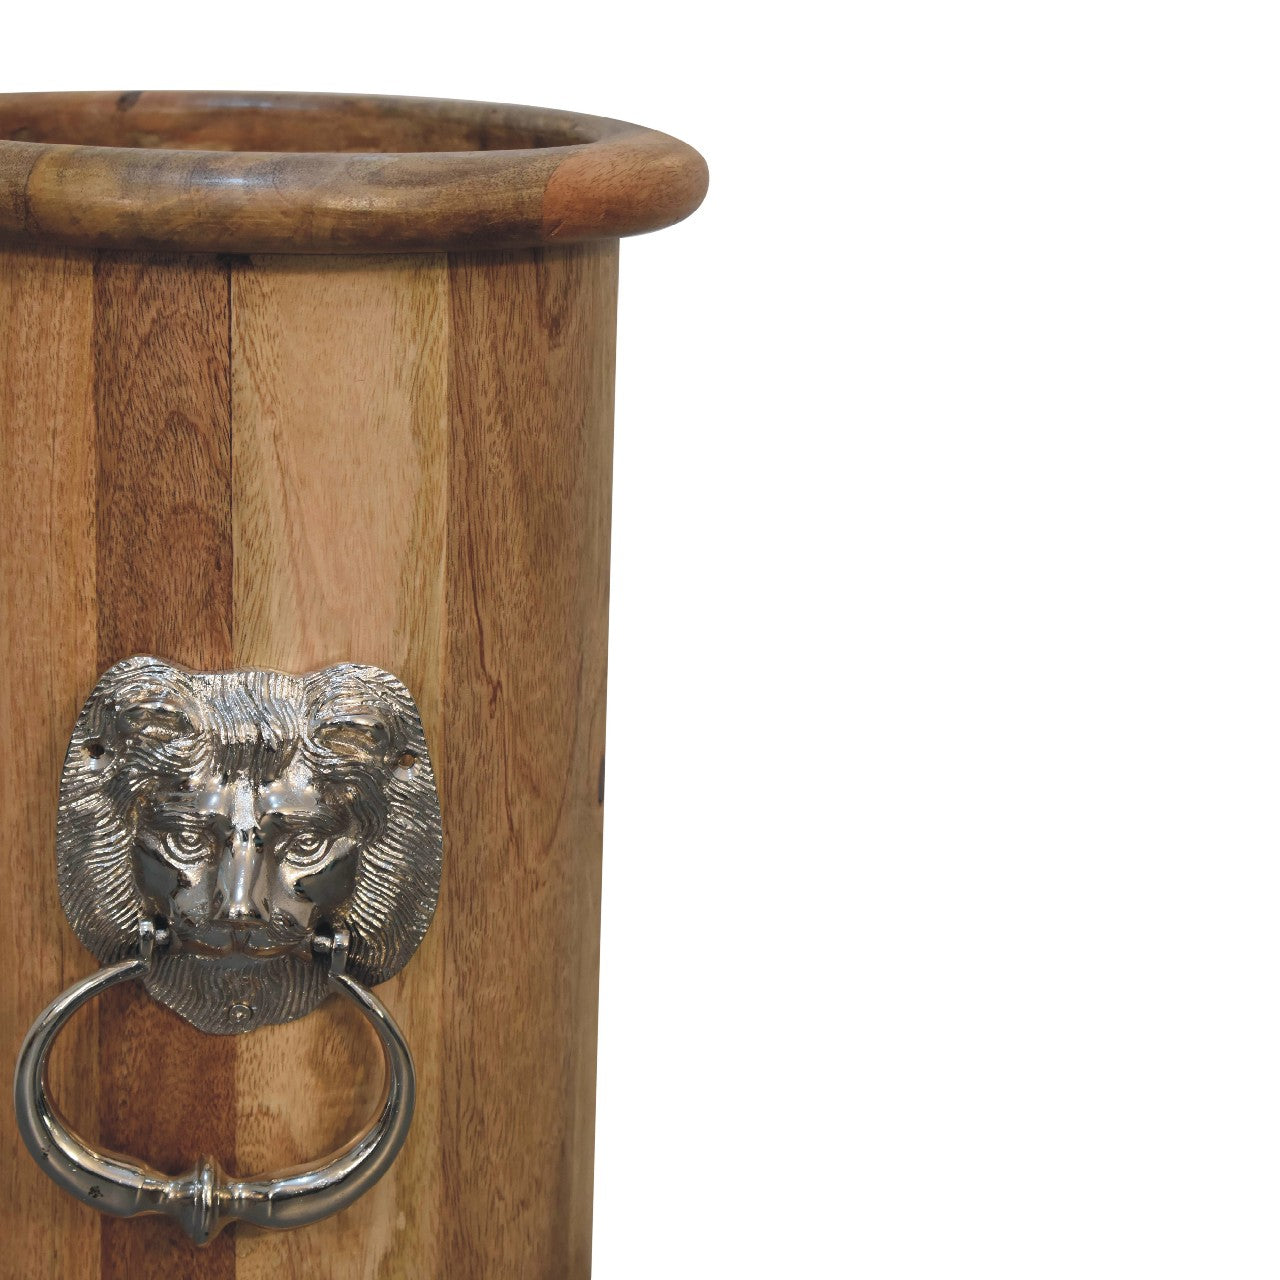 solid wood round umbrella stand with knocker